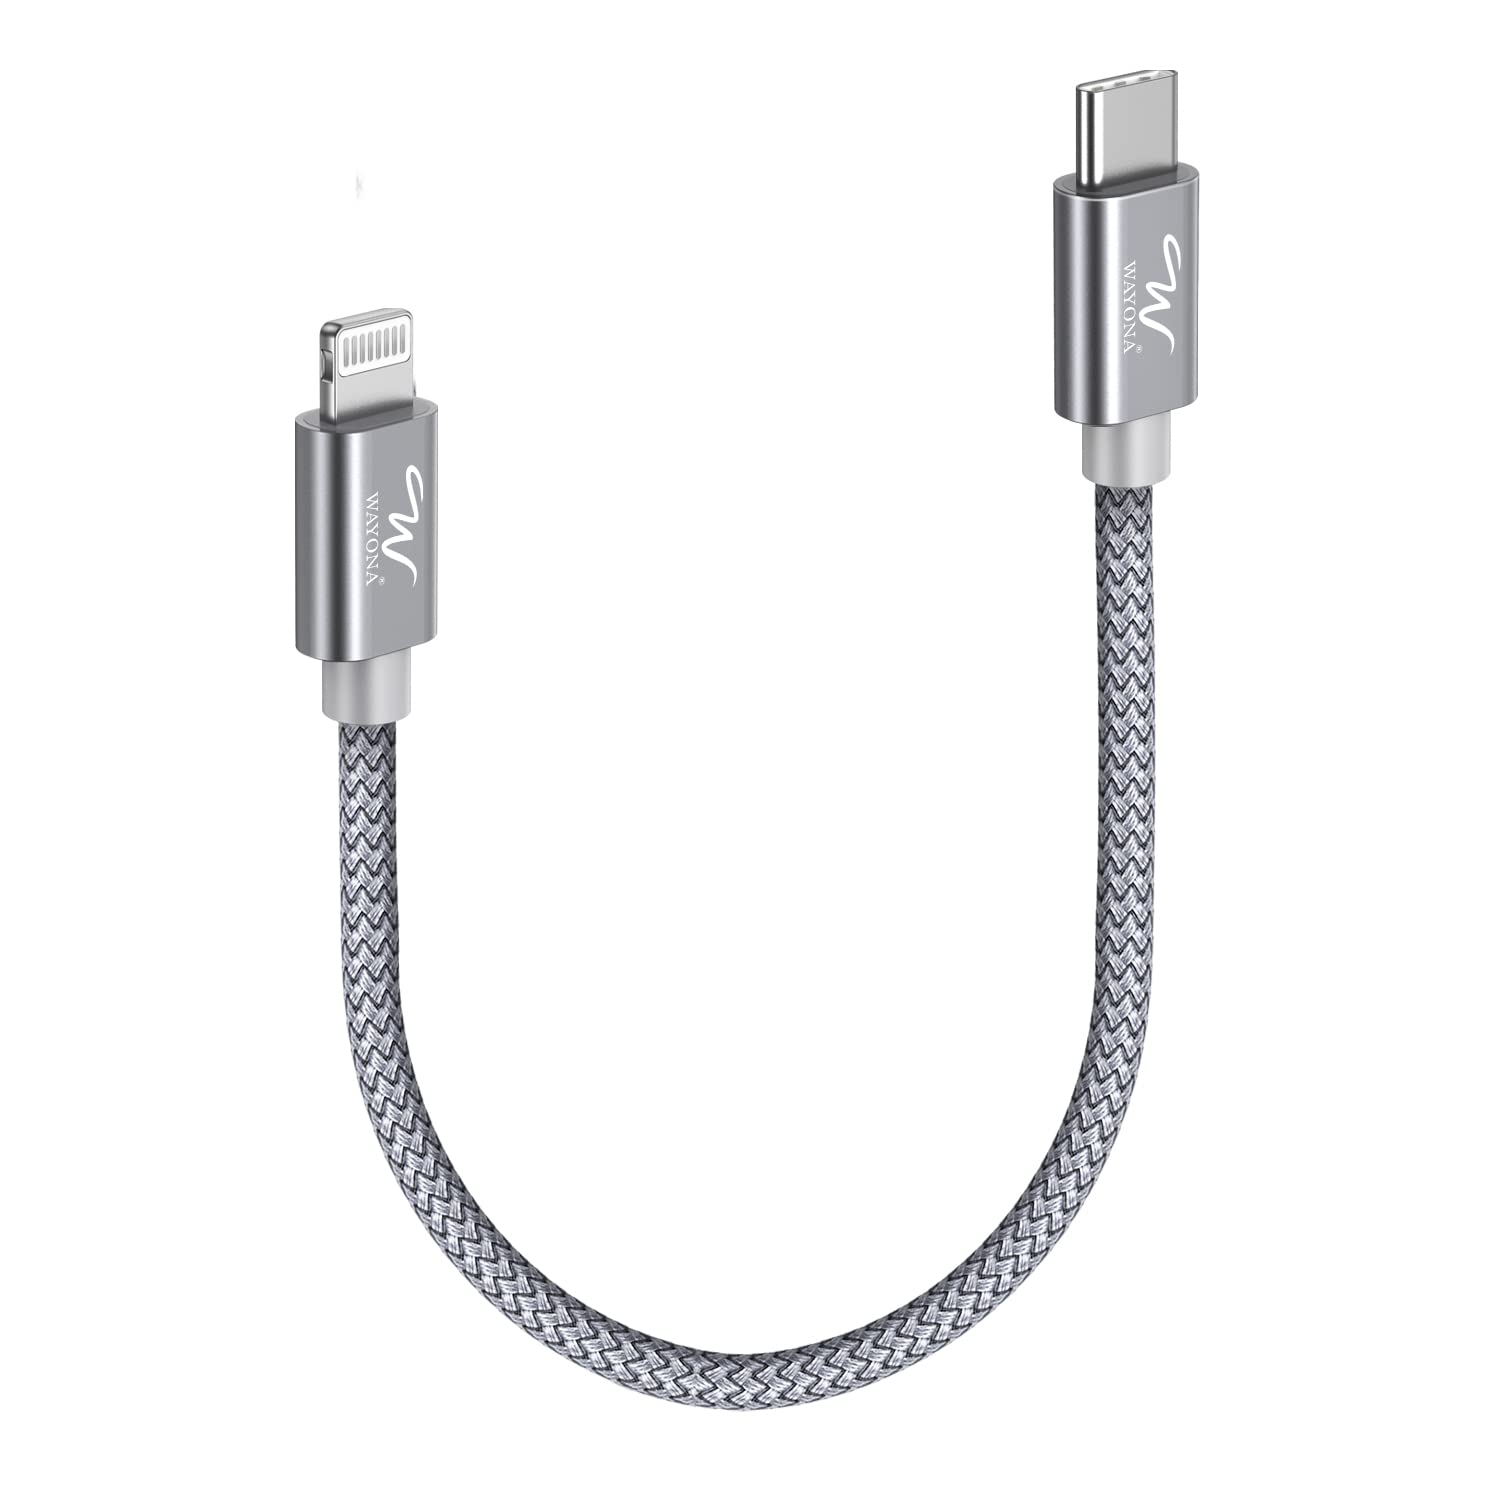 Câble iPhone Lightning - USB-C Power Delivery MFI 3A Charge Rapide